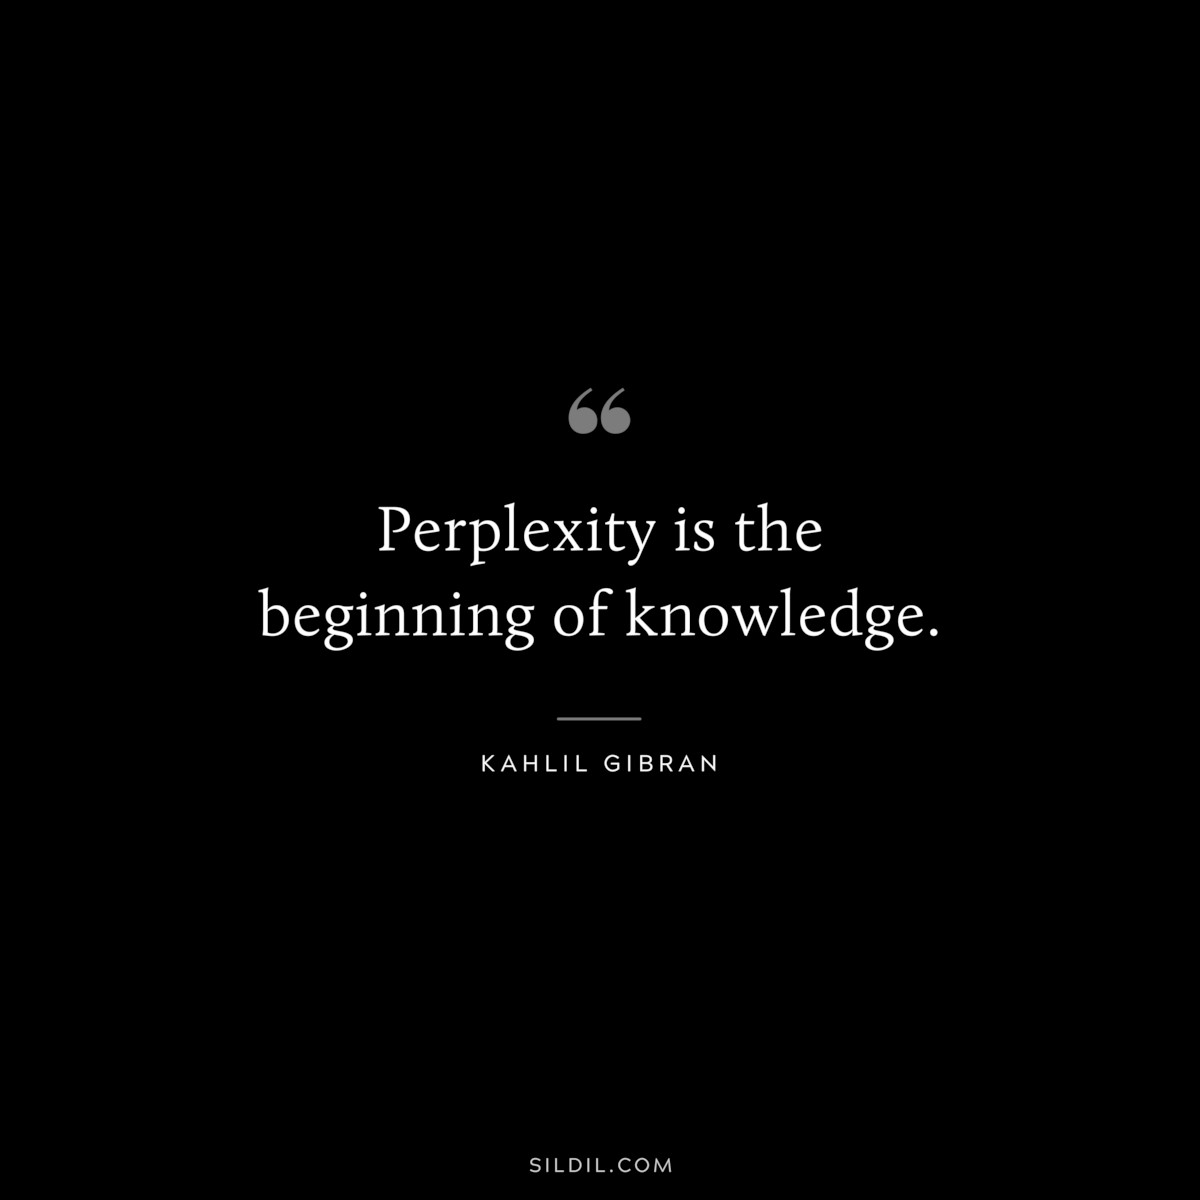 Perplexity is the beginning of knowledge. ― Kahlil Gibran